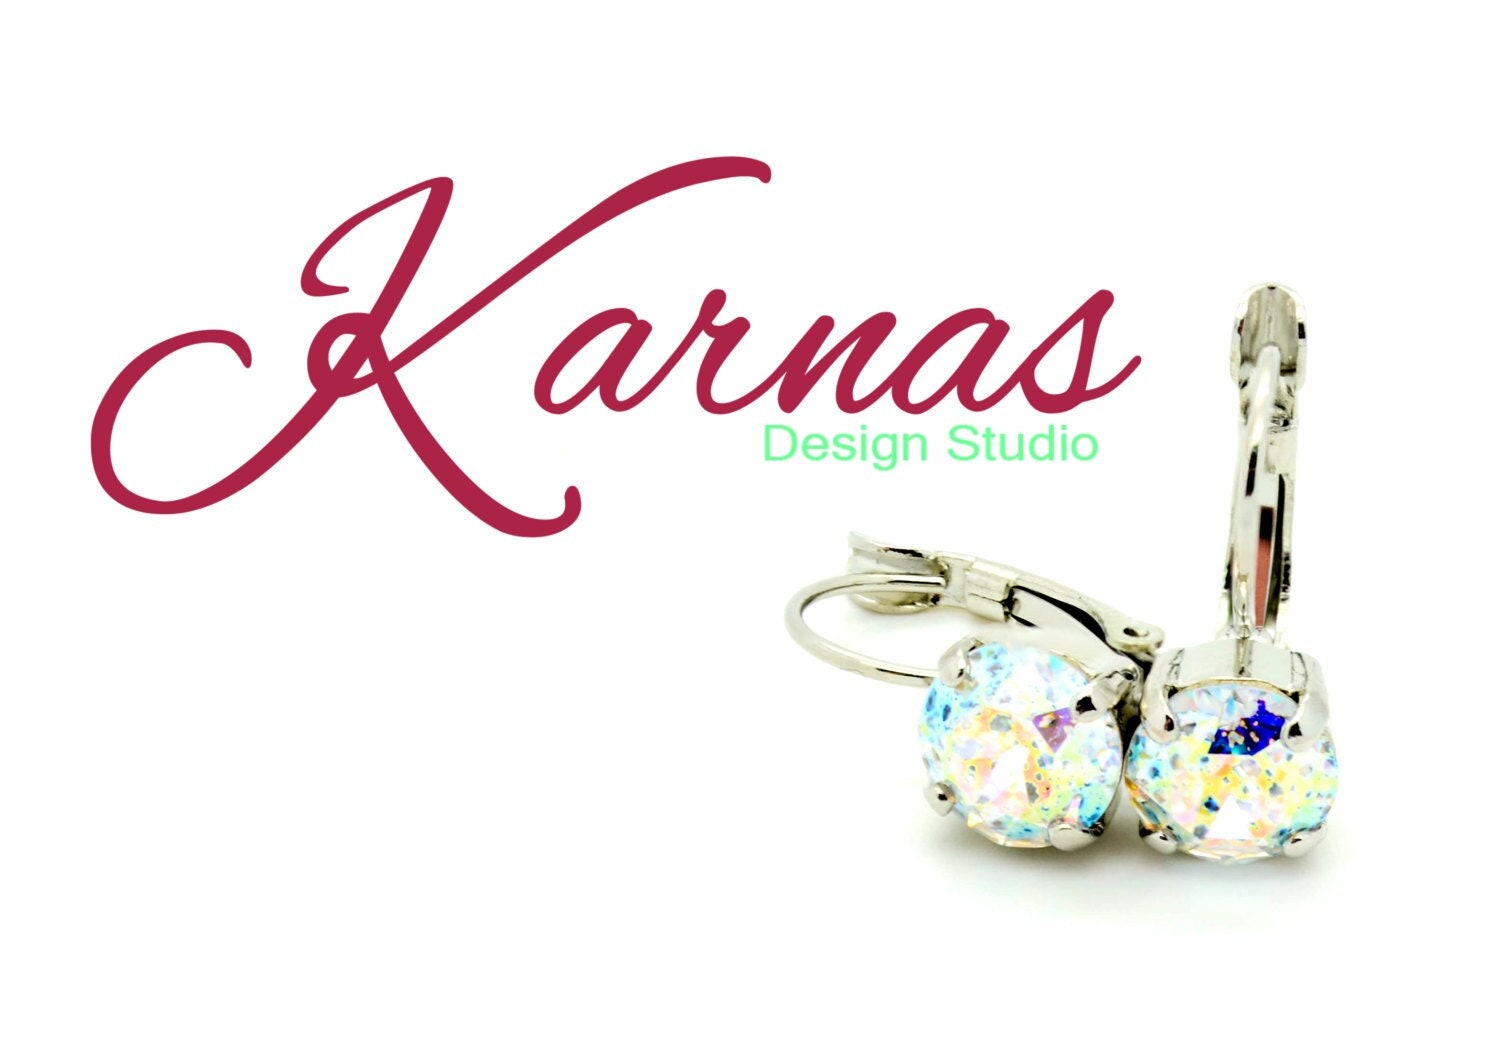 Dusted Crystal 8mm Drop Or Stud Earrings Made With K.d.s. Premium Crystal Choose Your Finish Karnas Design Studio Free Shipping